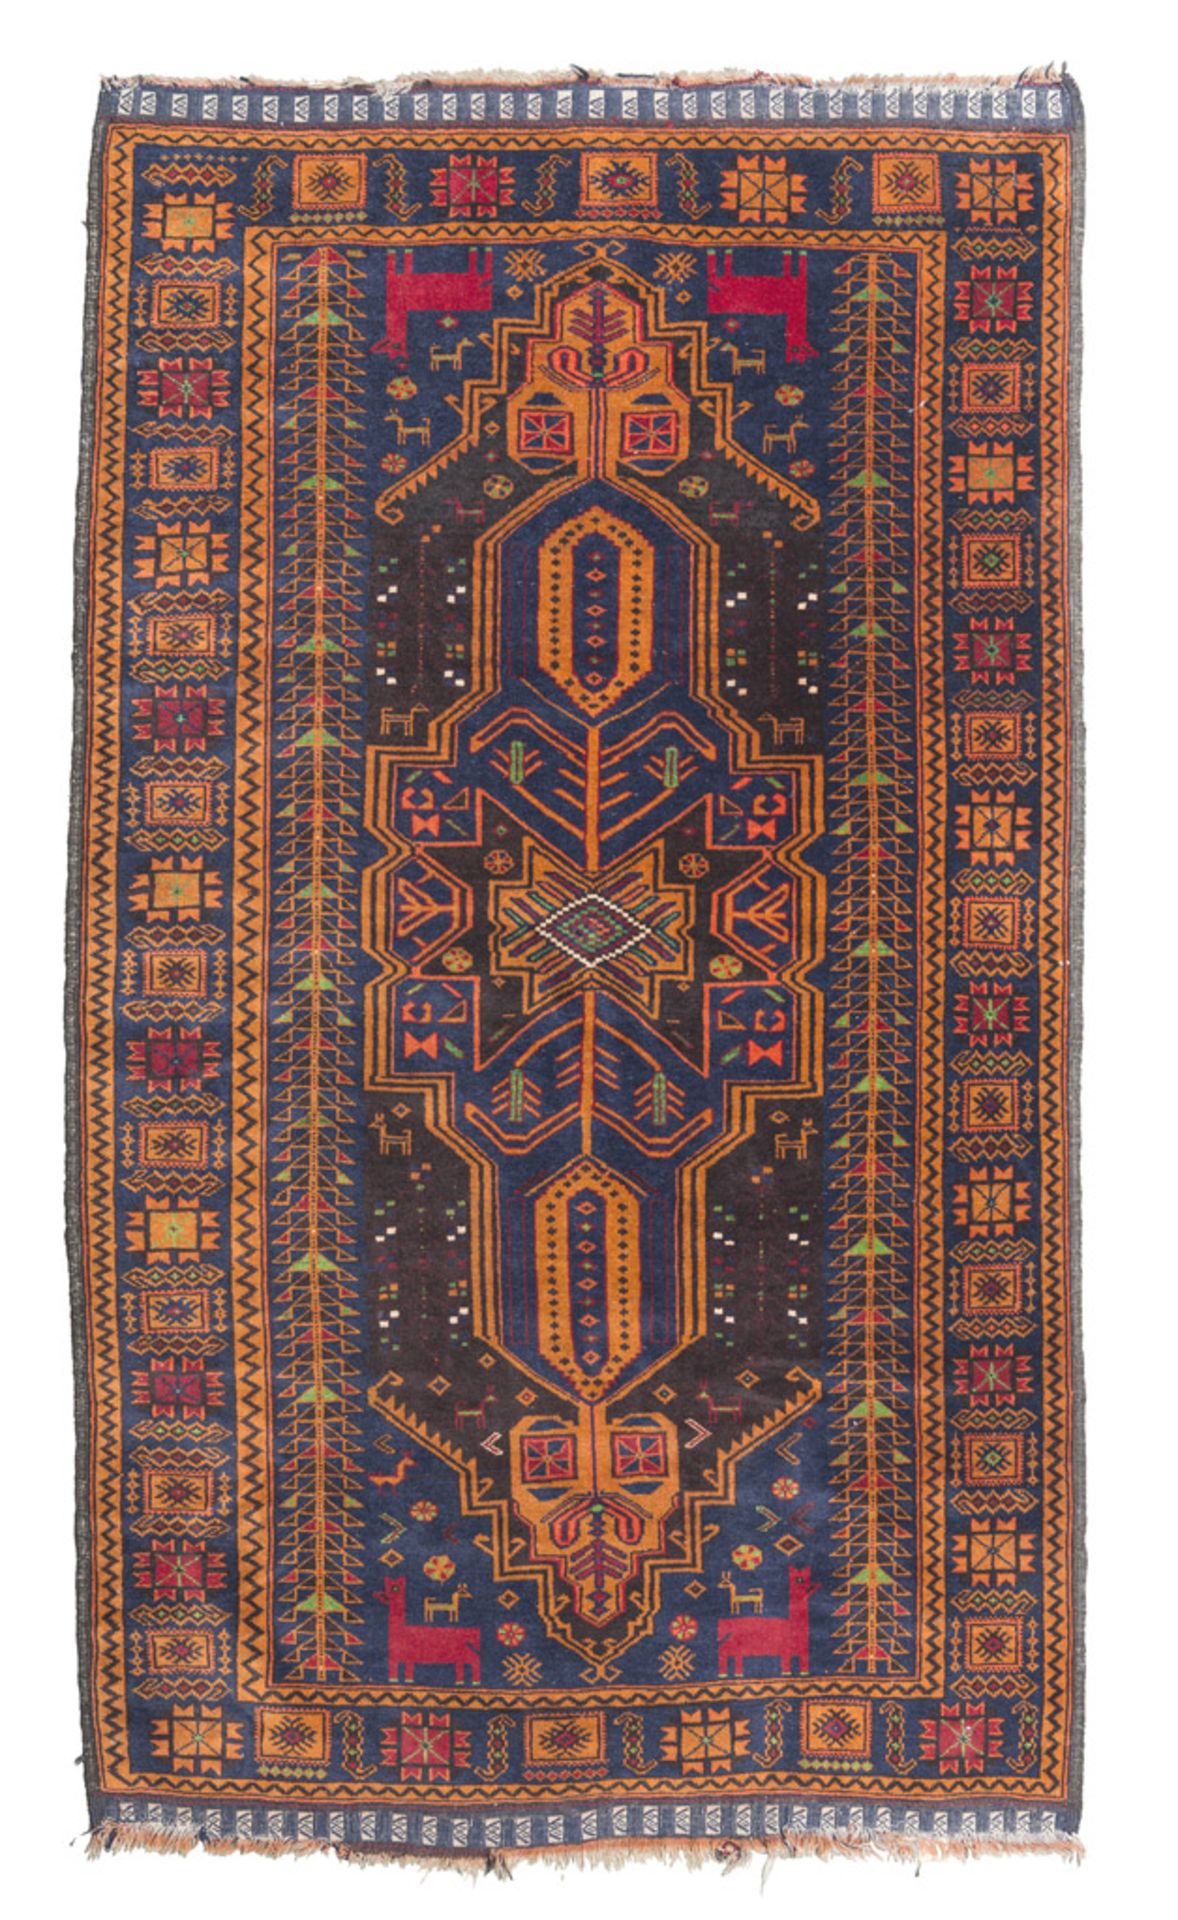 A RARE BELUCISTAN CARPET, MID-20TH CENTURY with design of stars, leaves, animals and indented